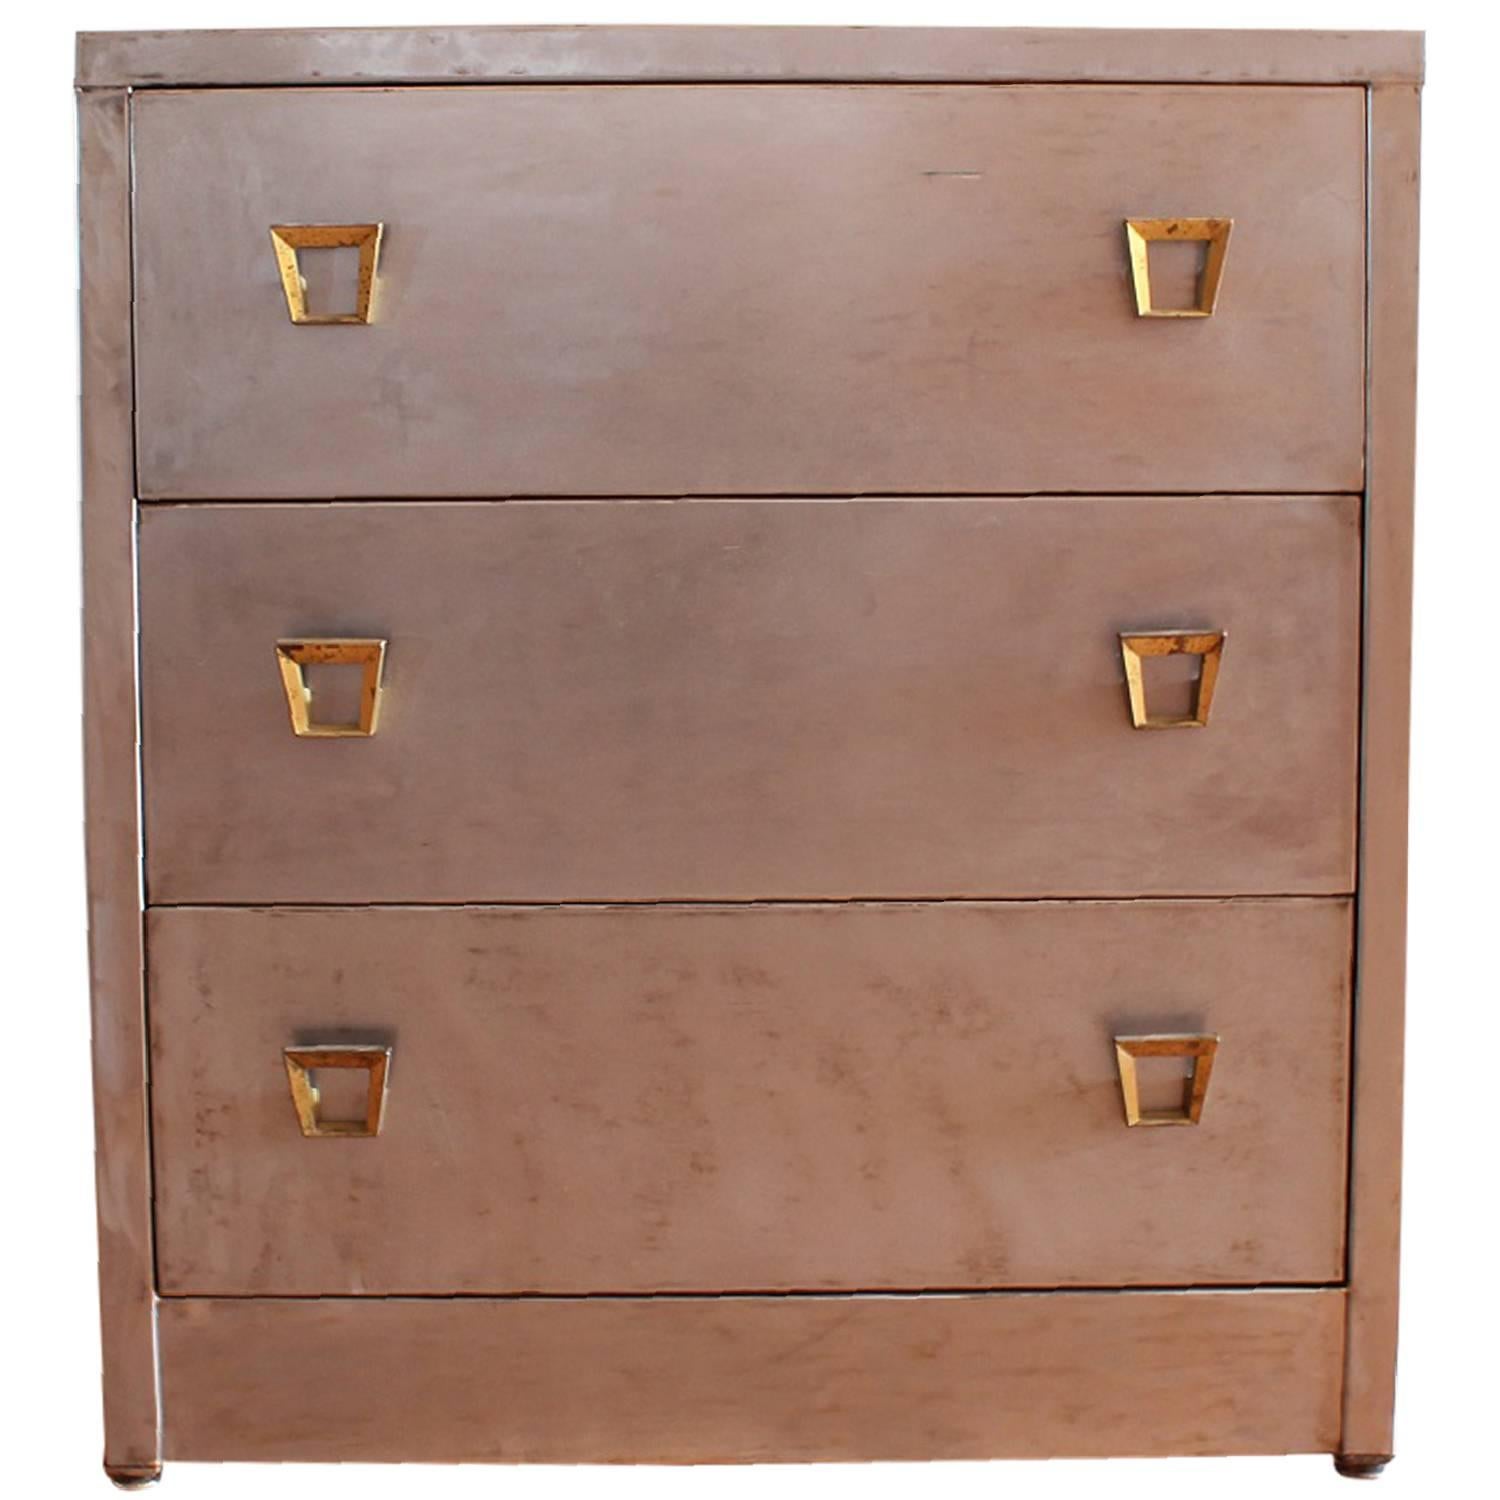 Stylish 1920's Metal Dresser With Brass Hardware For Sale